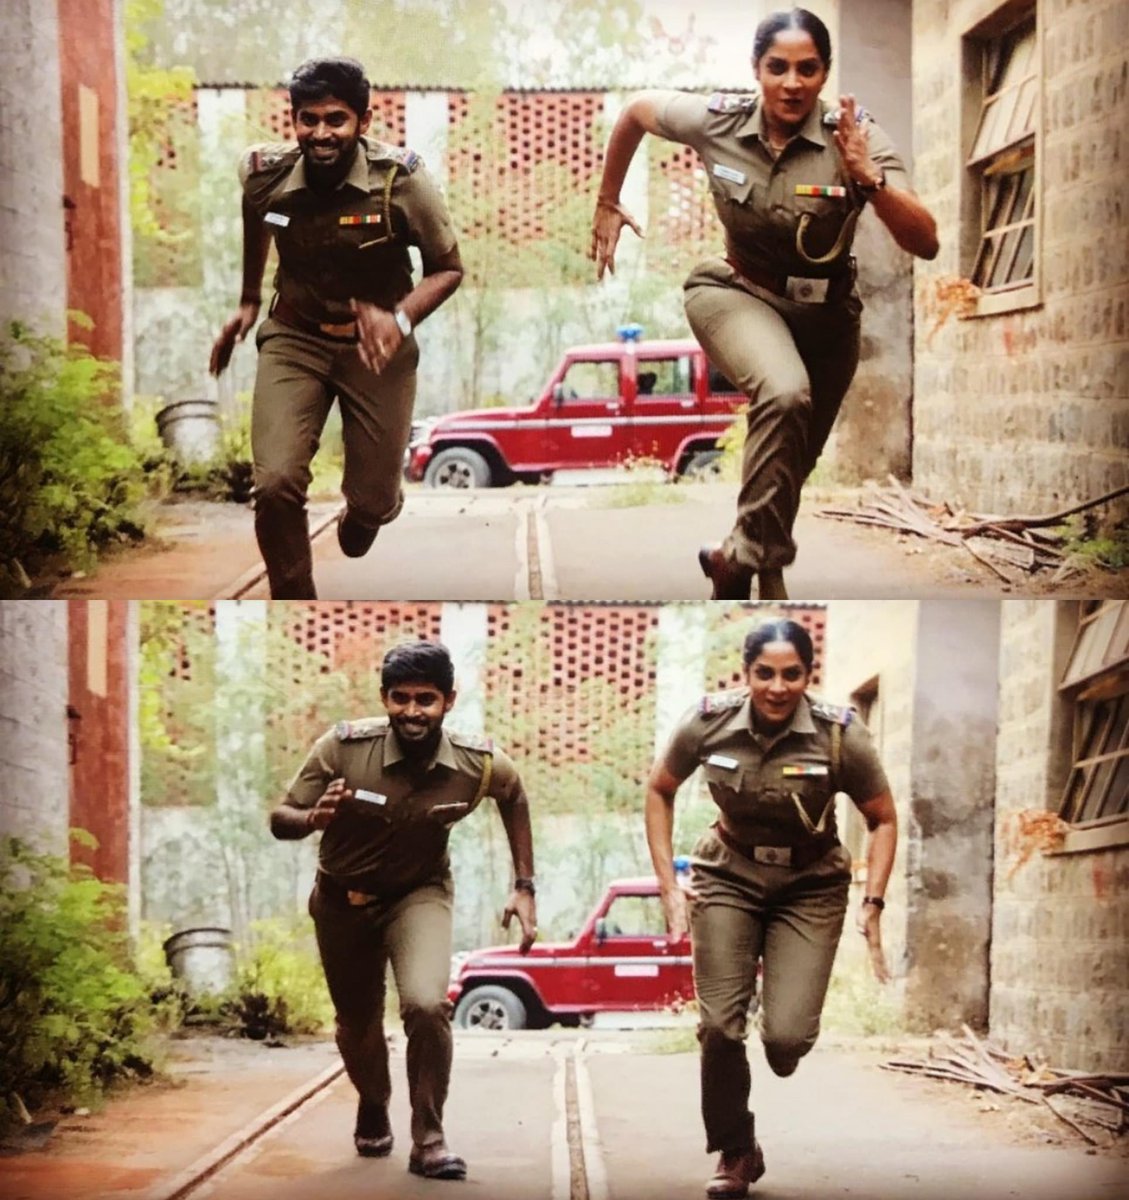 Power packed police officers 
@am_kathir @sriyareddy from #SuzhalTheVortex cracked the case very well and loved their performances.
#SuzhalOnPrime #Suzhal